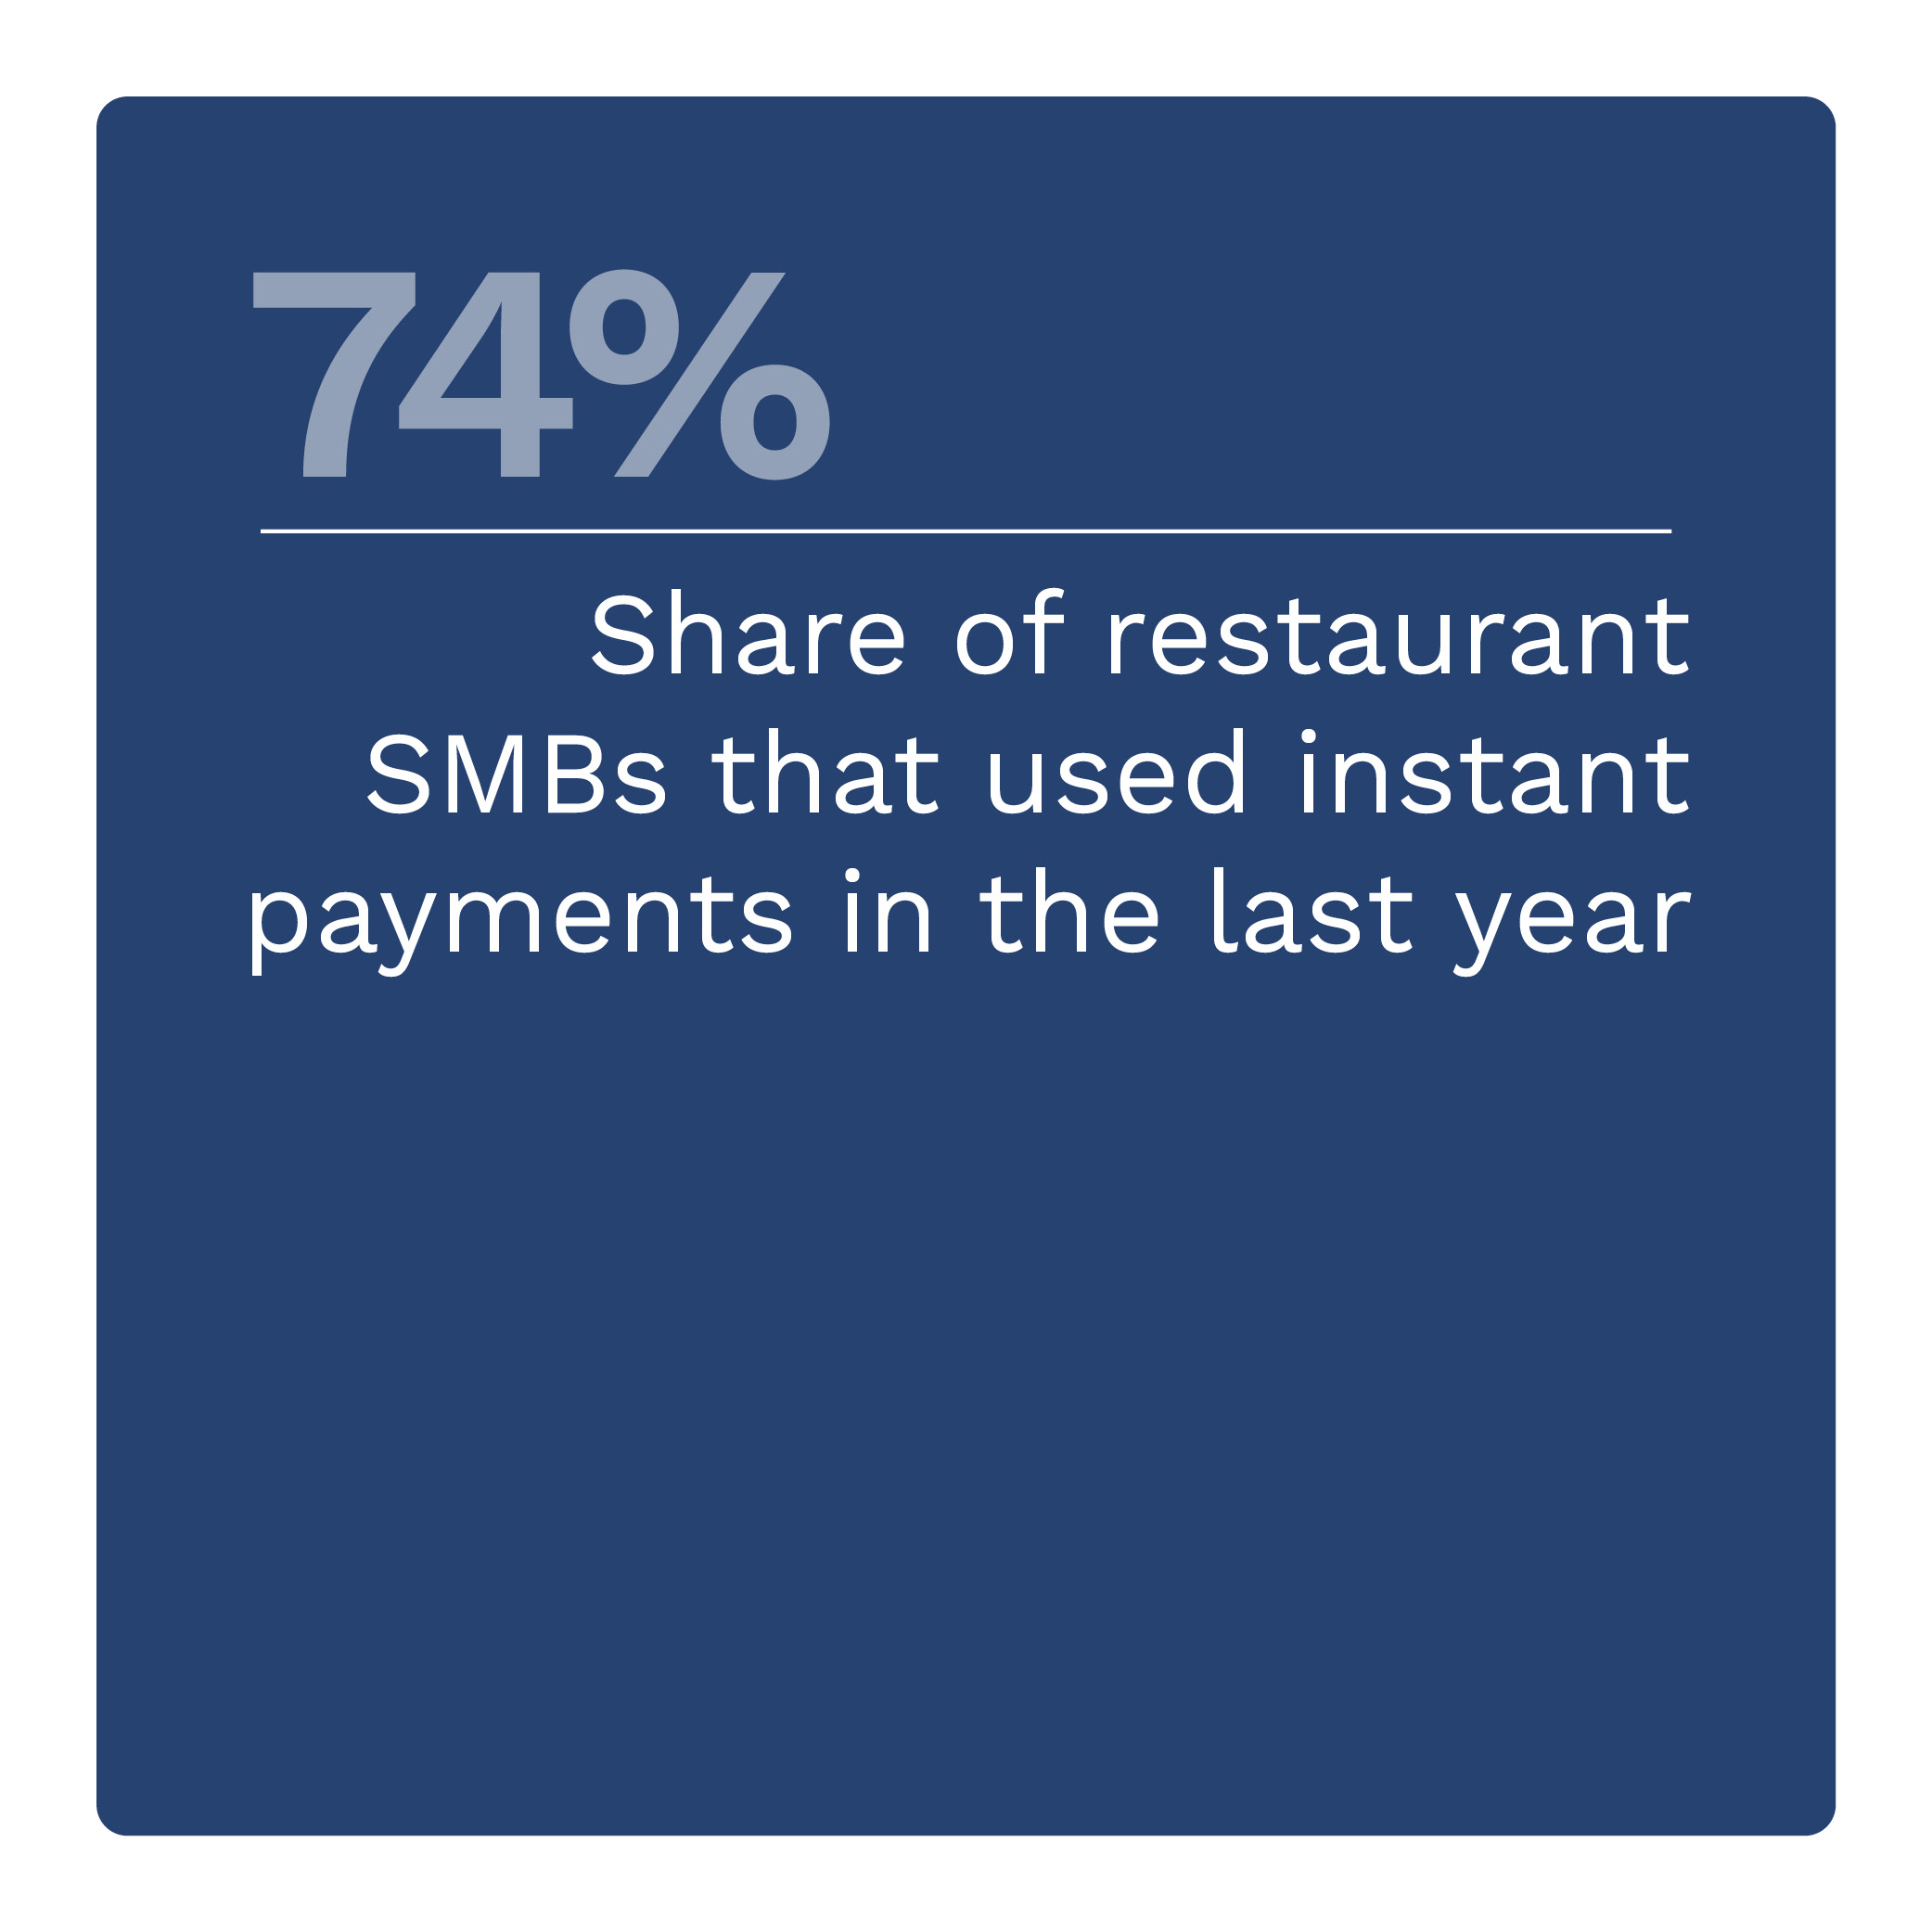 74%: Share of restaurant SMBs that used instant payments in the last year